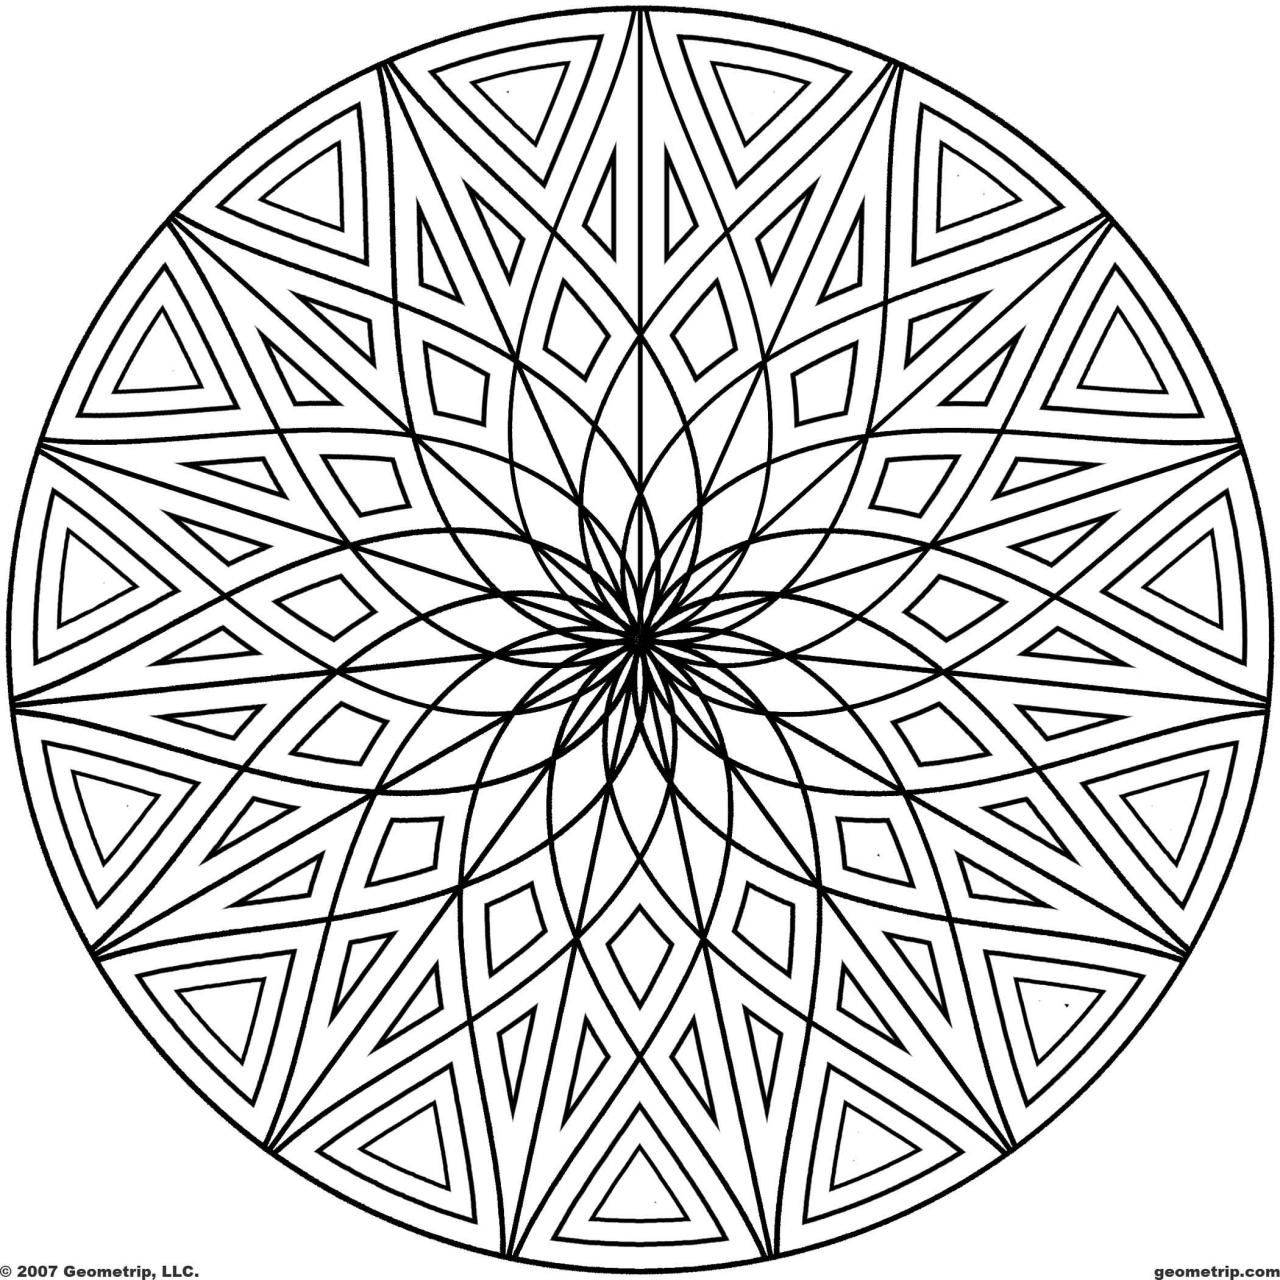 Cool Designs To Color In - Coloring Pages for Kids and for Adults